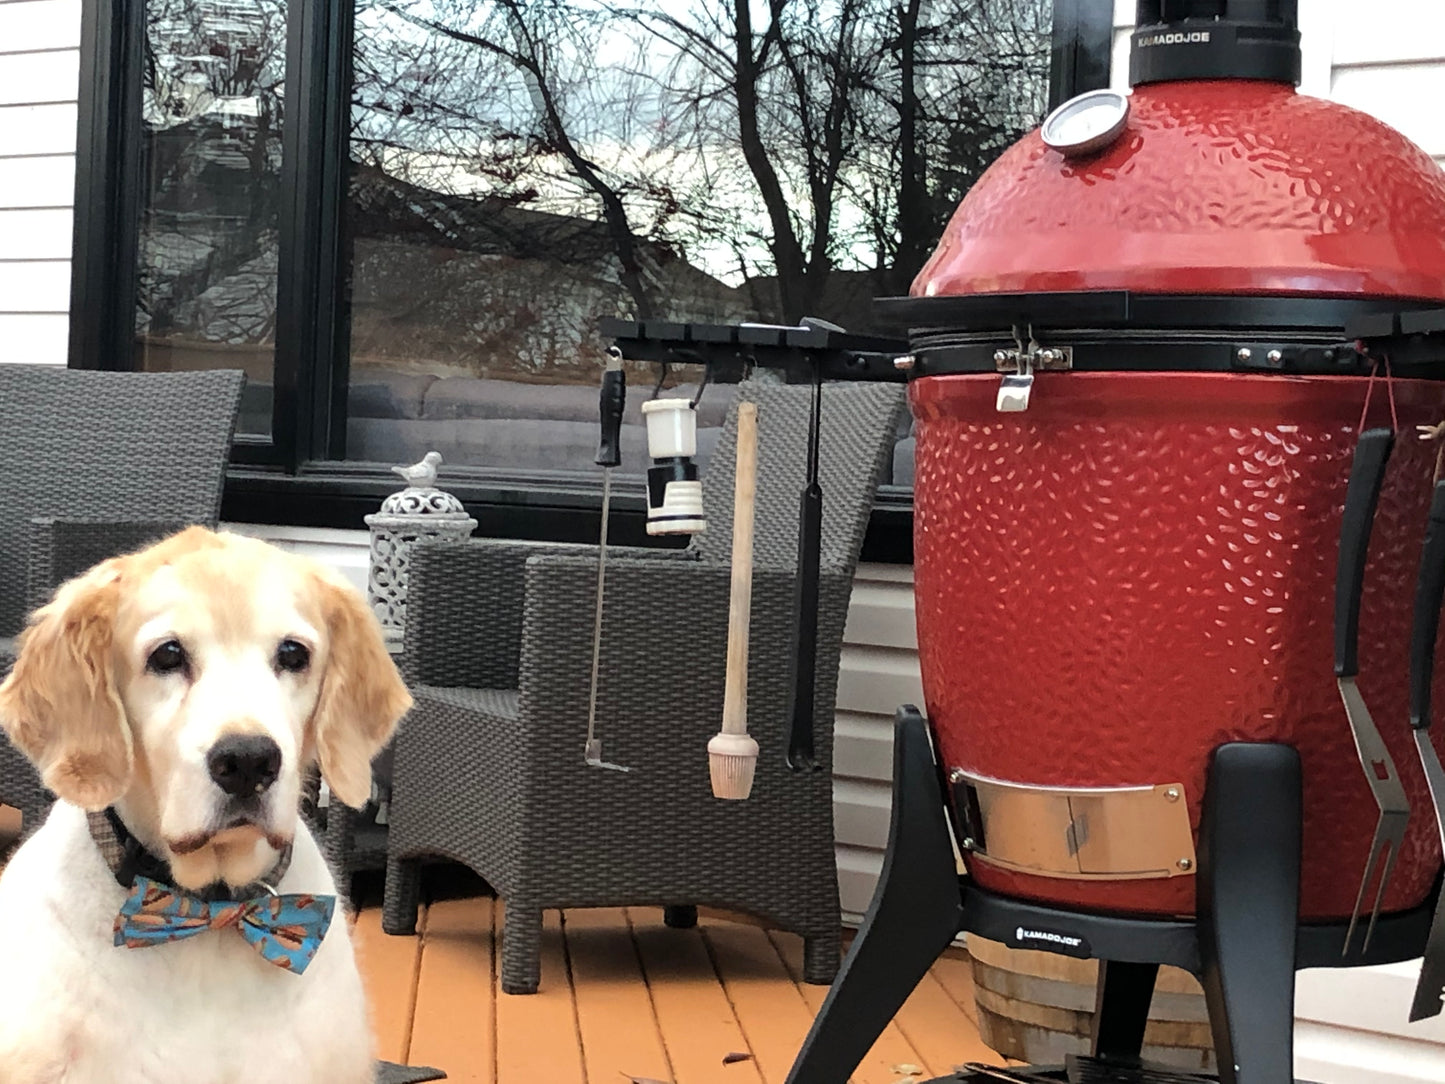 The Kamado Joe - Classic Joe III With Cart.  The perfect ceramic grill for summer time grilling. Available at Barbecues Galore: Burlington, Oakville, Etobicoke & Calgary